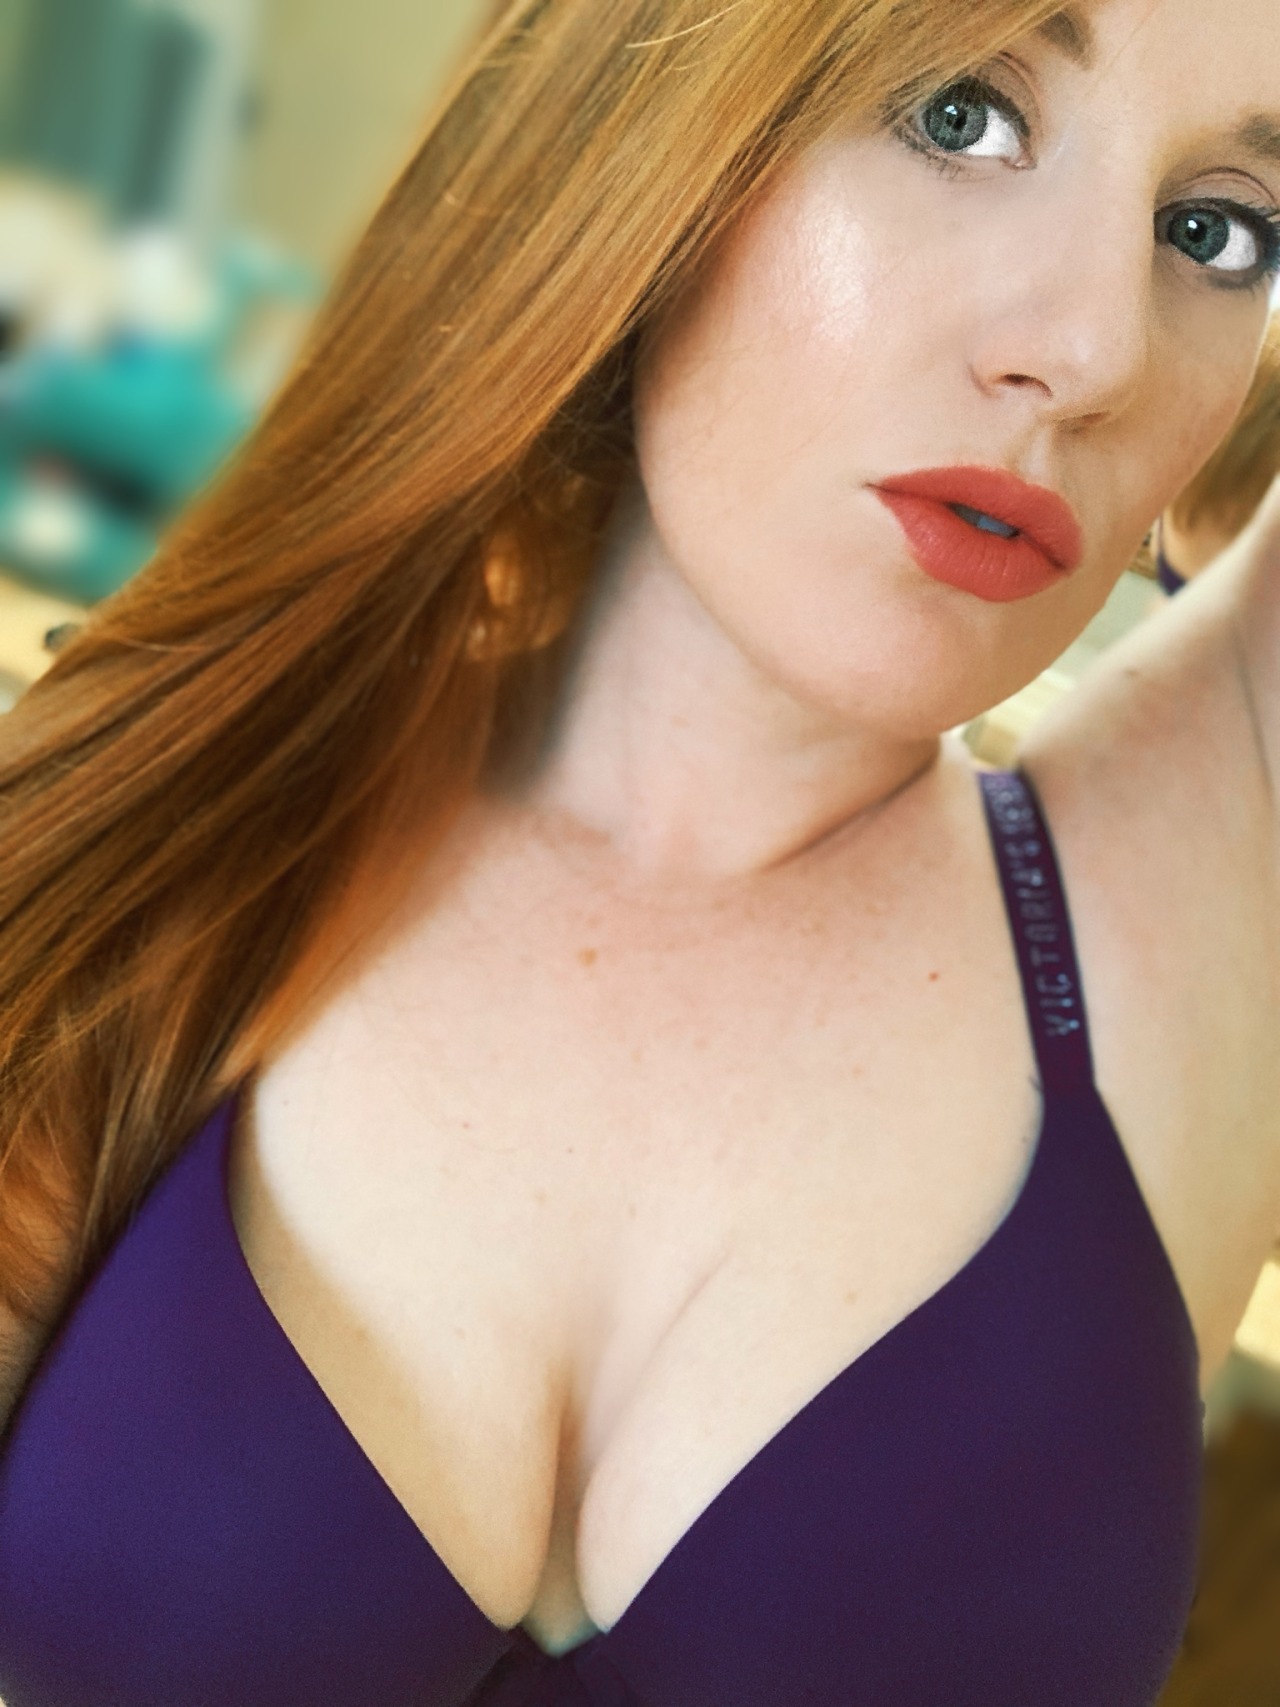 daydreaming-redhead:Watch out 2020, I’m comin in hot!!! 🔥😉